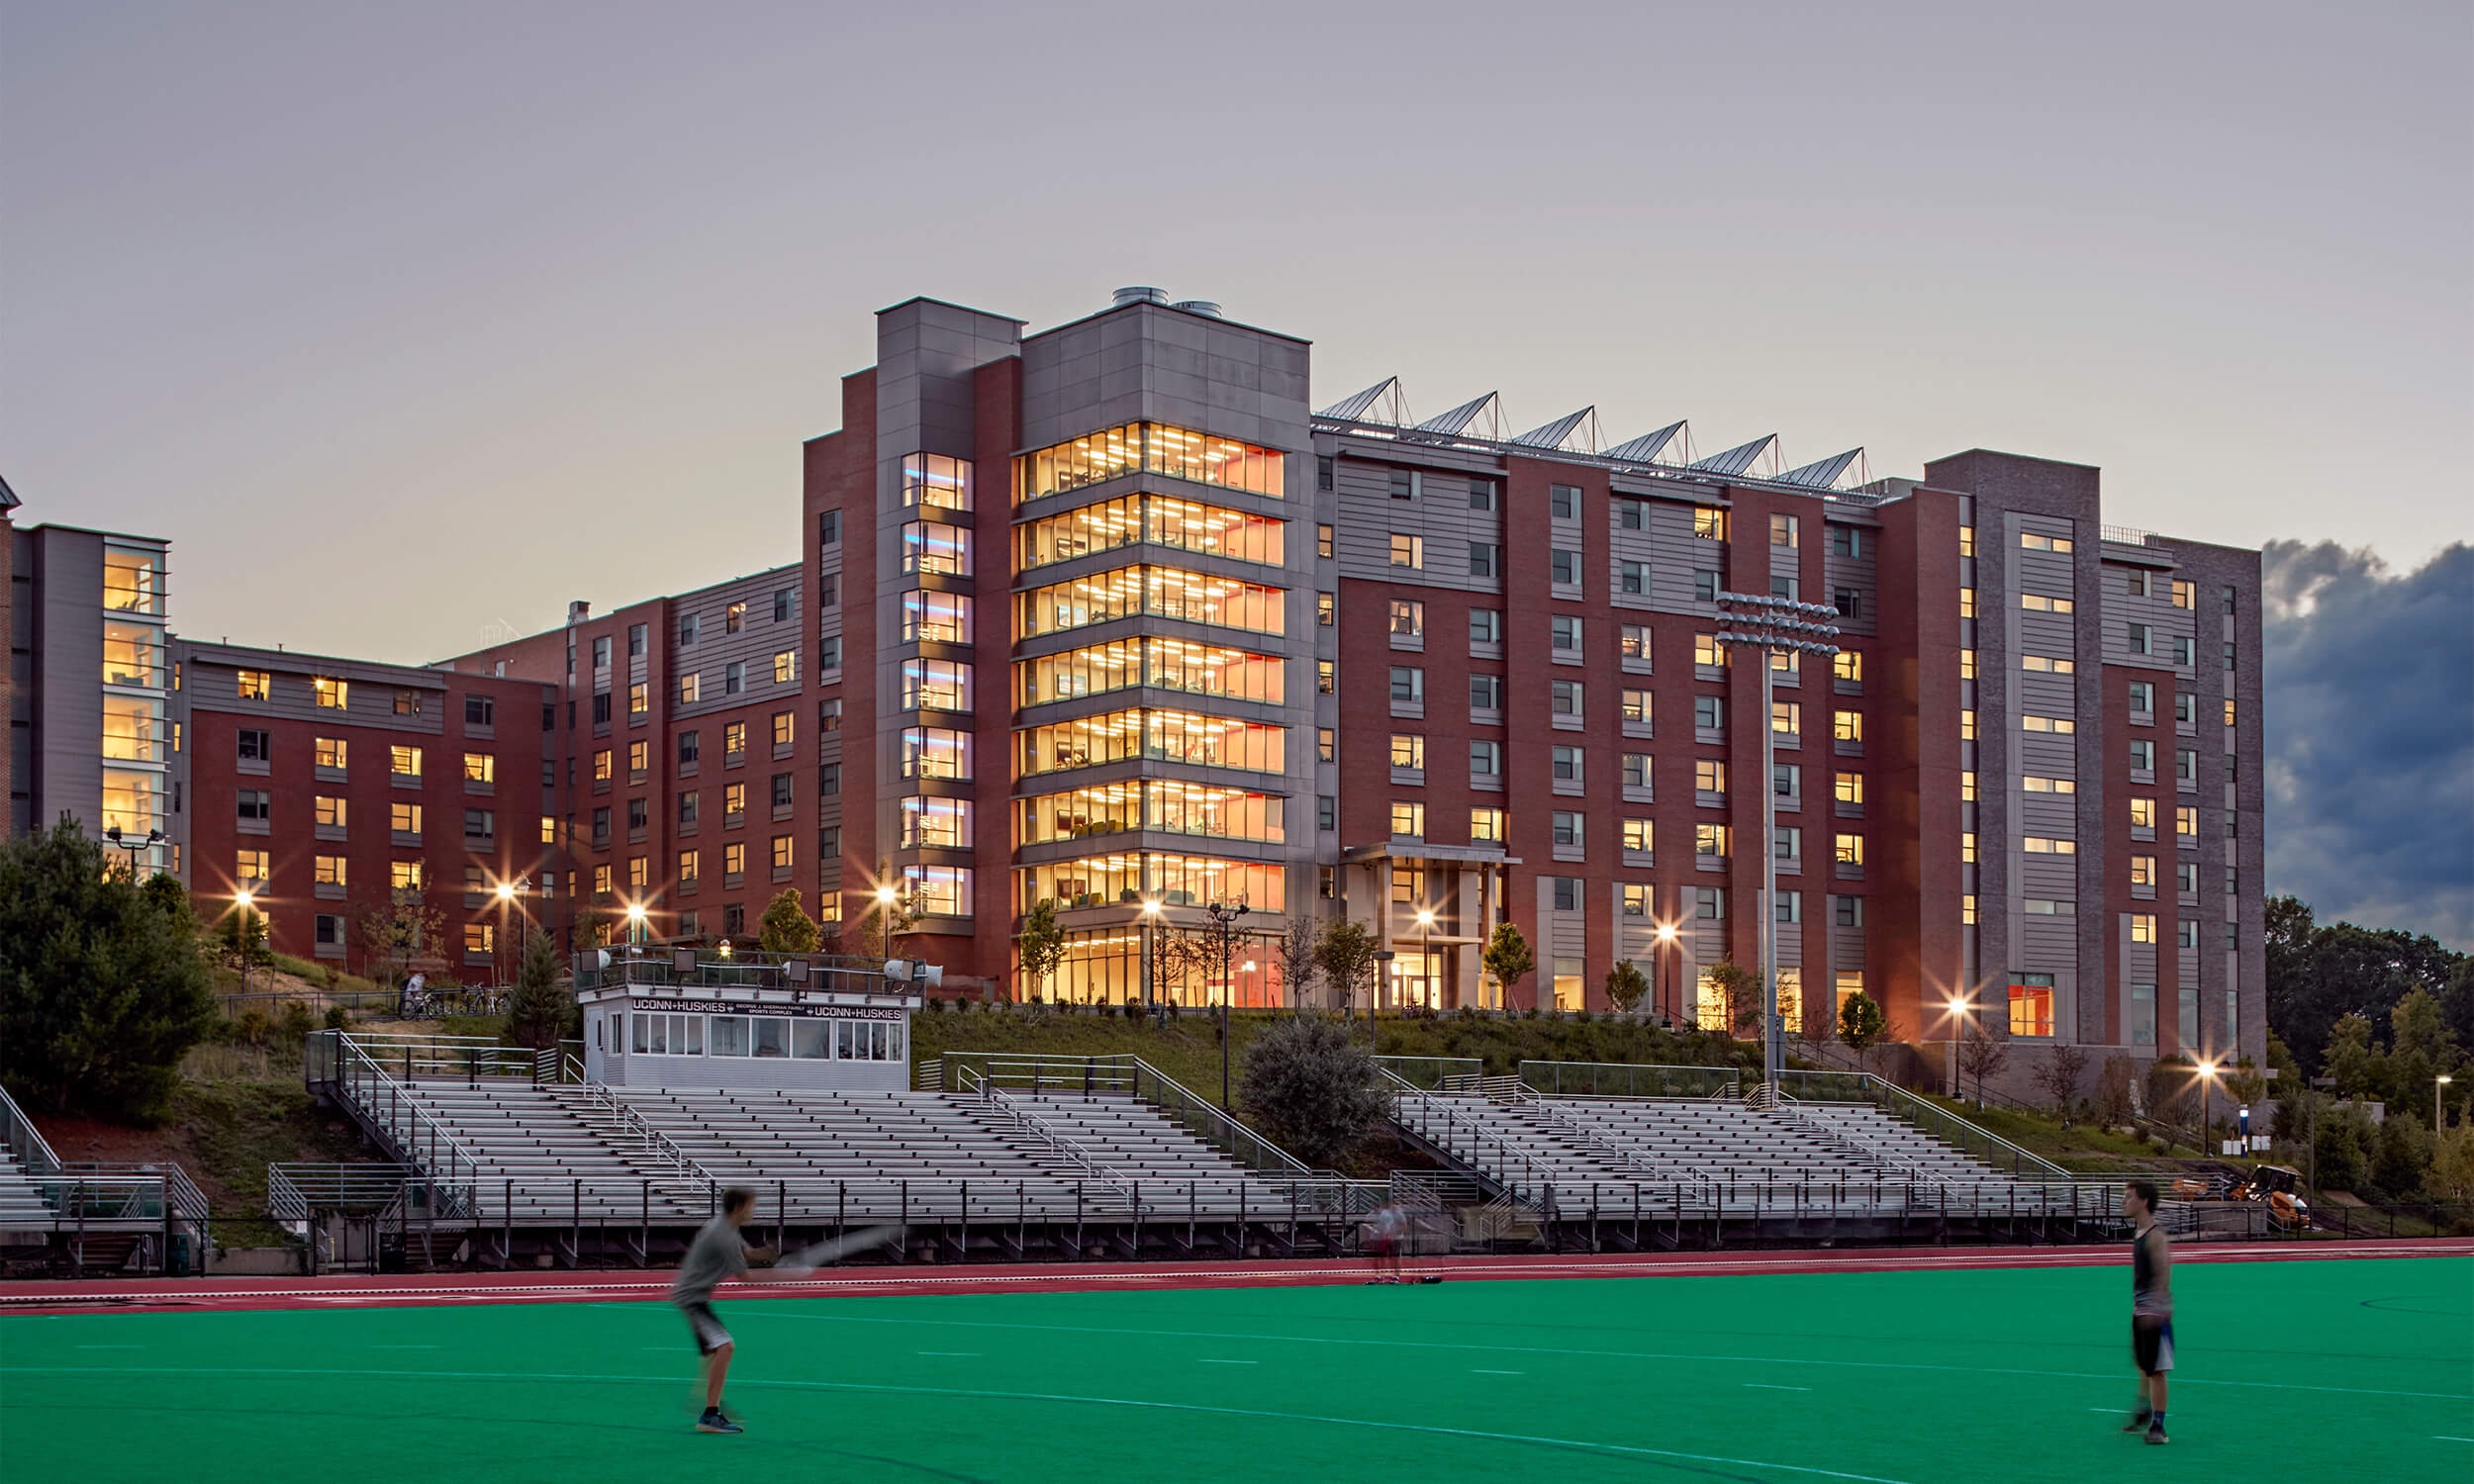 Exterior view of a college campus building as seen across an athletic field. The photo appears to be taken at dusk, with lighting illuminating the building from within.